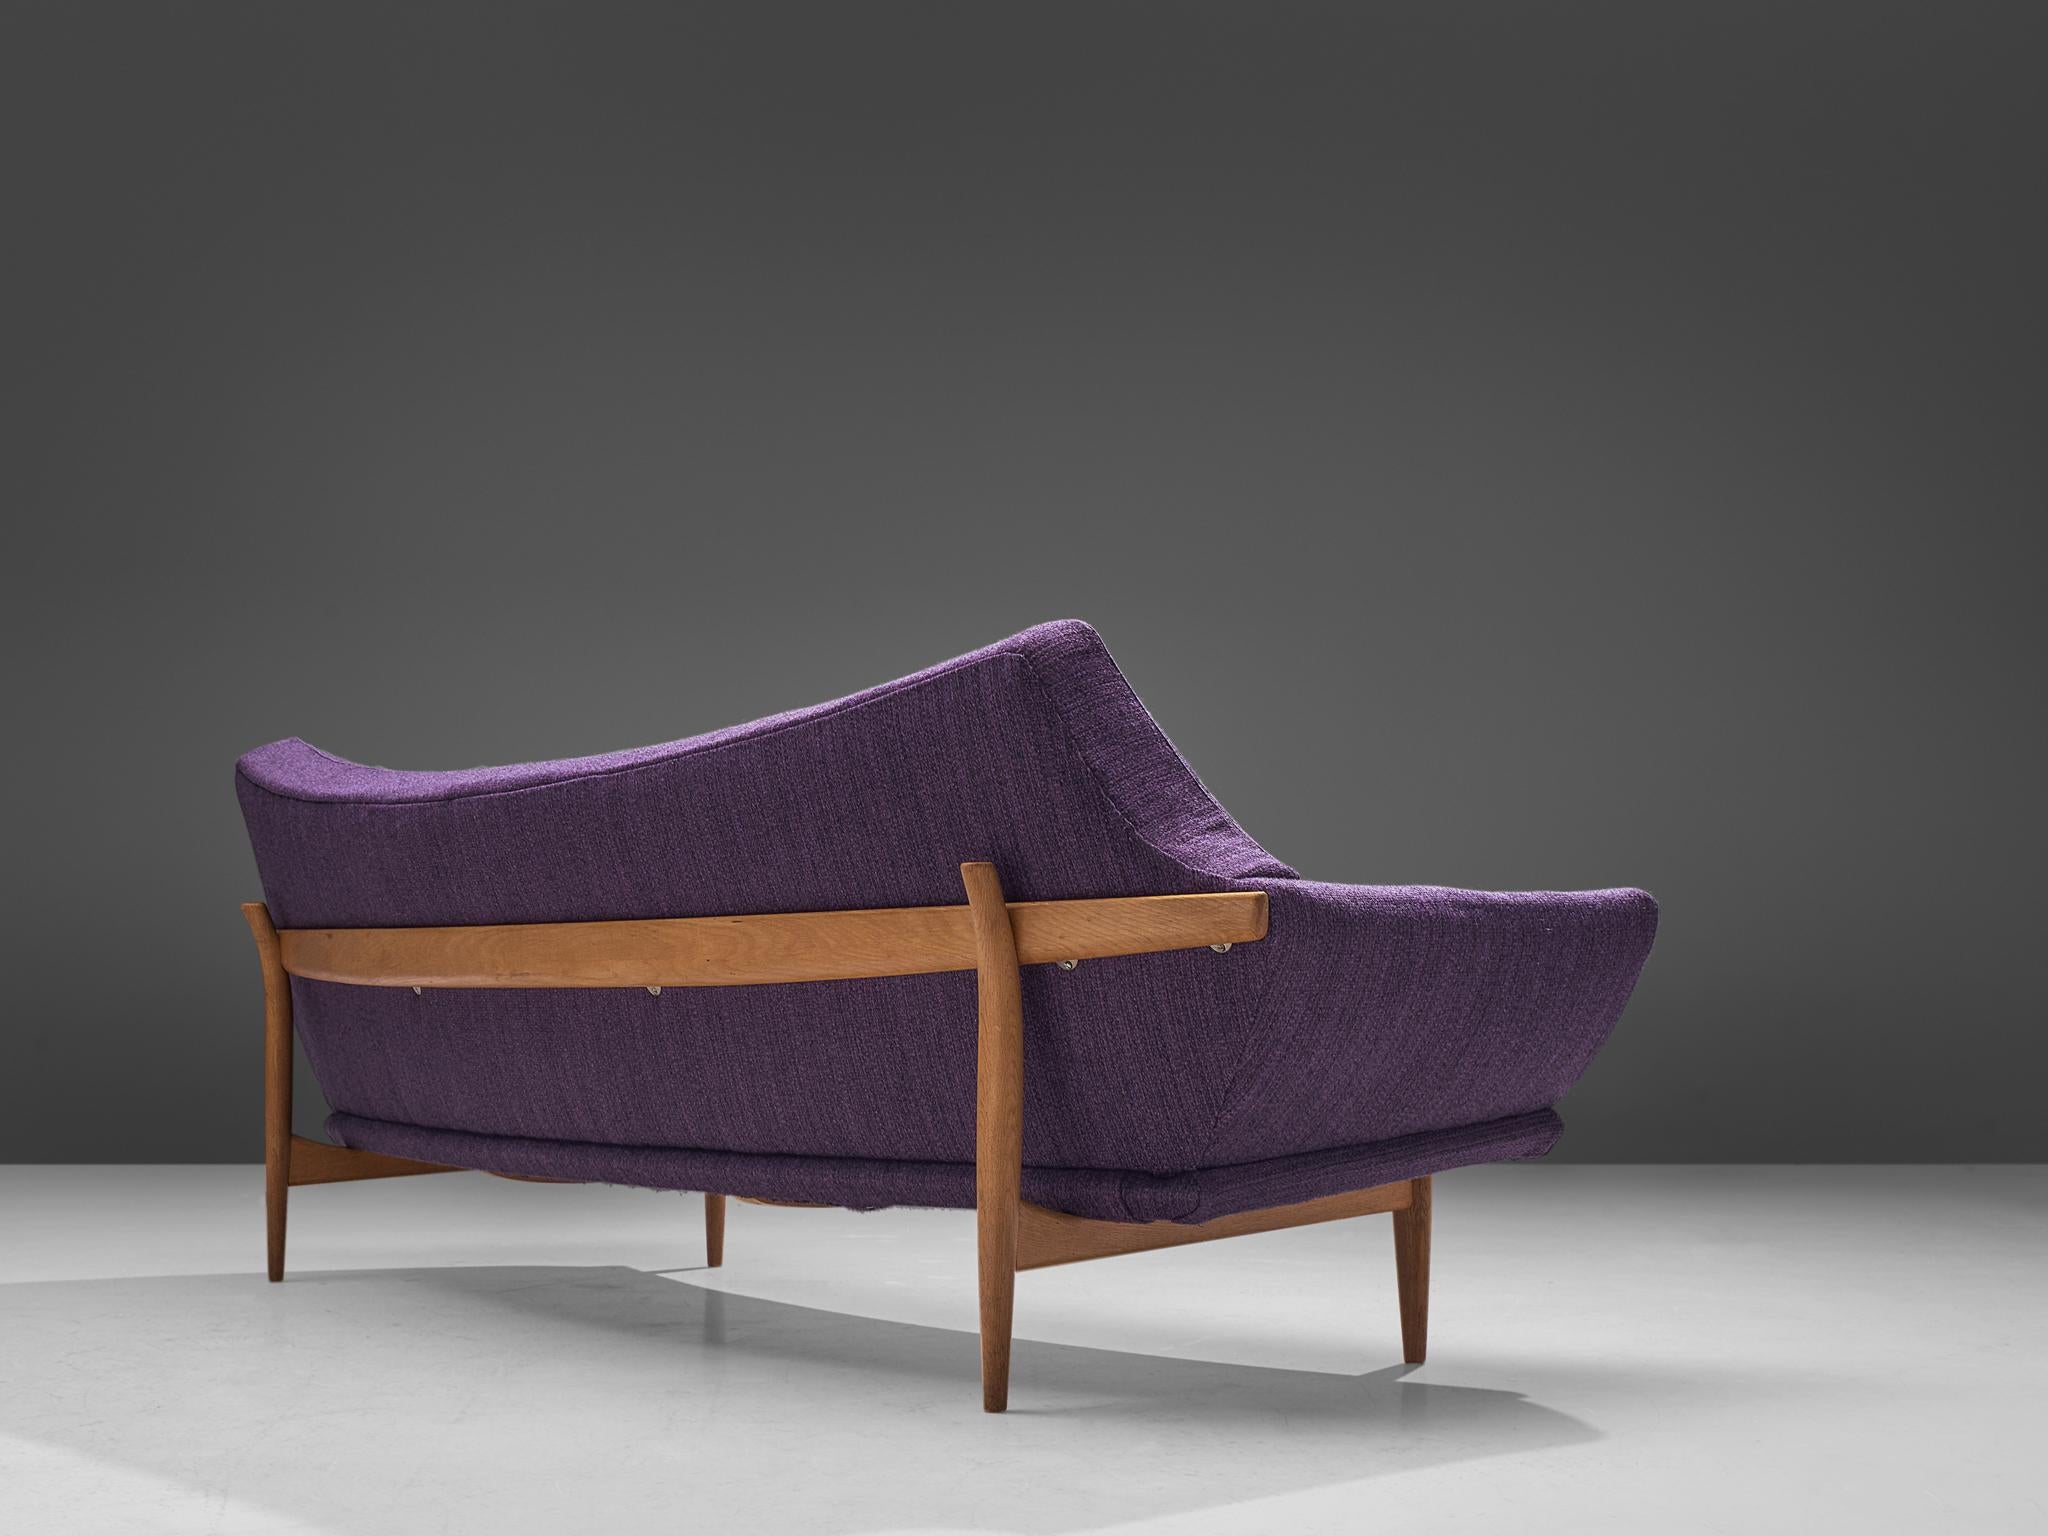 Johannes Andersen for Trensums Fatöljfabrik, sofa, fabric, oak, Sweden, 1960s

Swedish three-seat sofa designed by Johannes Andersen in the 1960s. The curved sofa features a striking design with almost complete absence of straight lines. The seat